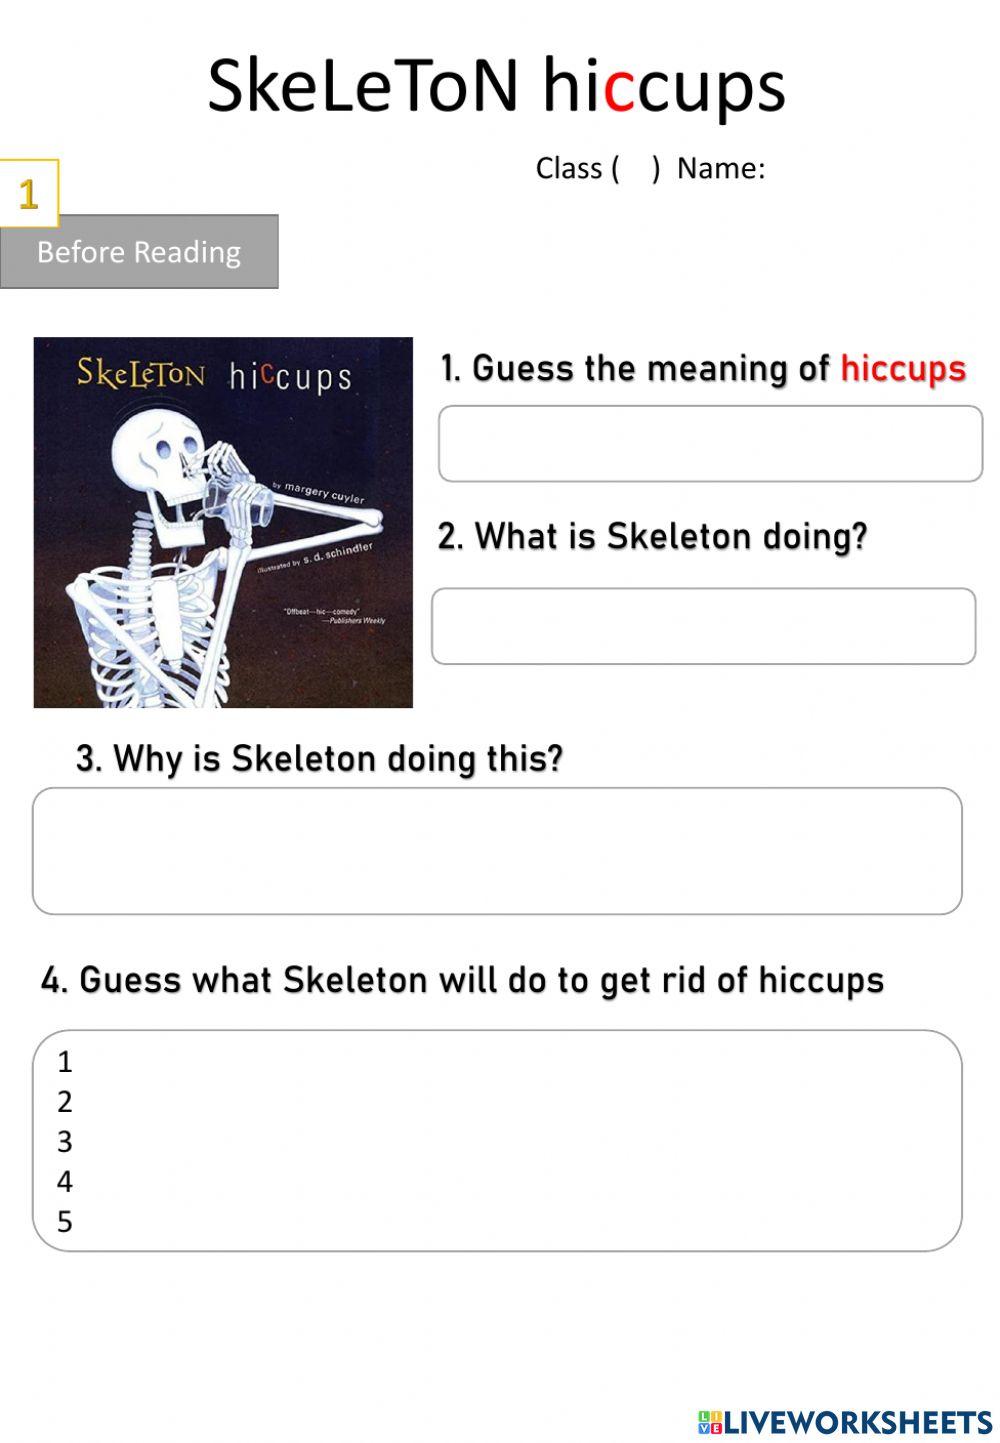 Skeleton hiccups